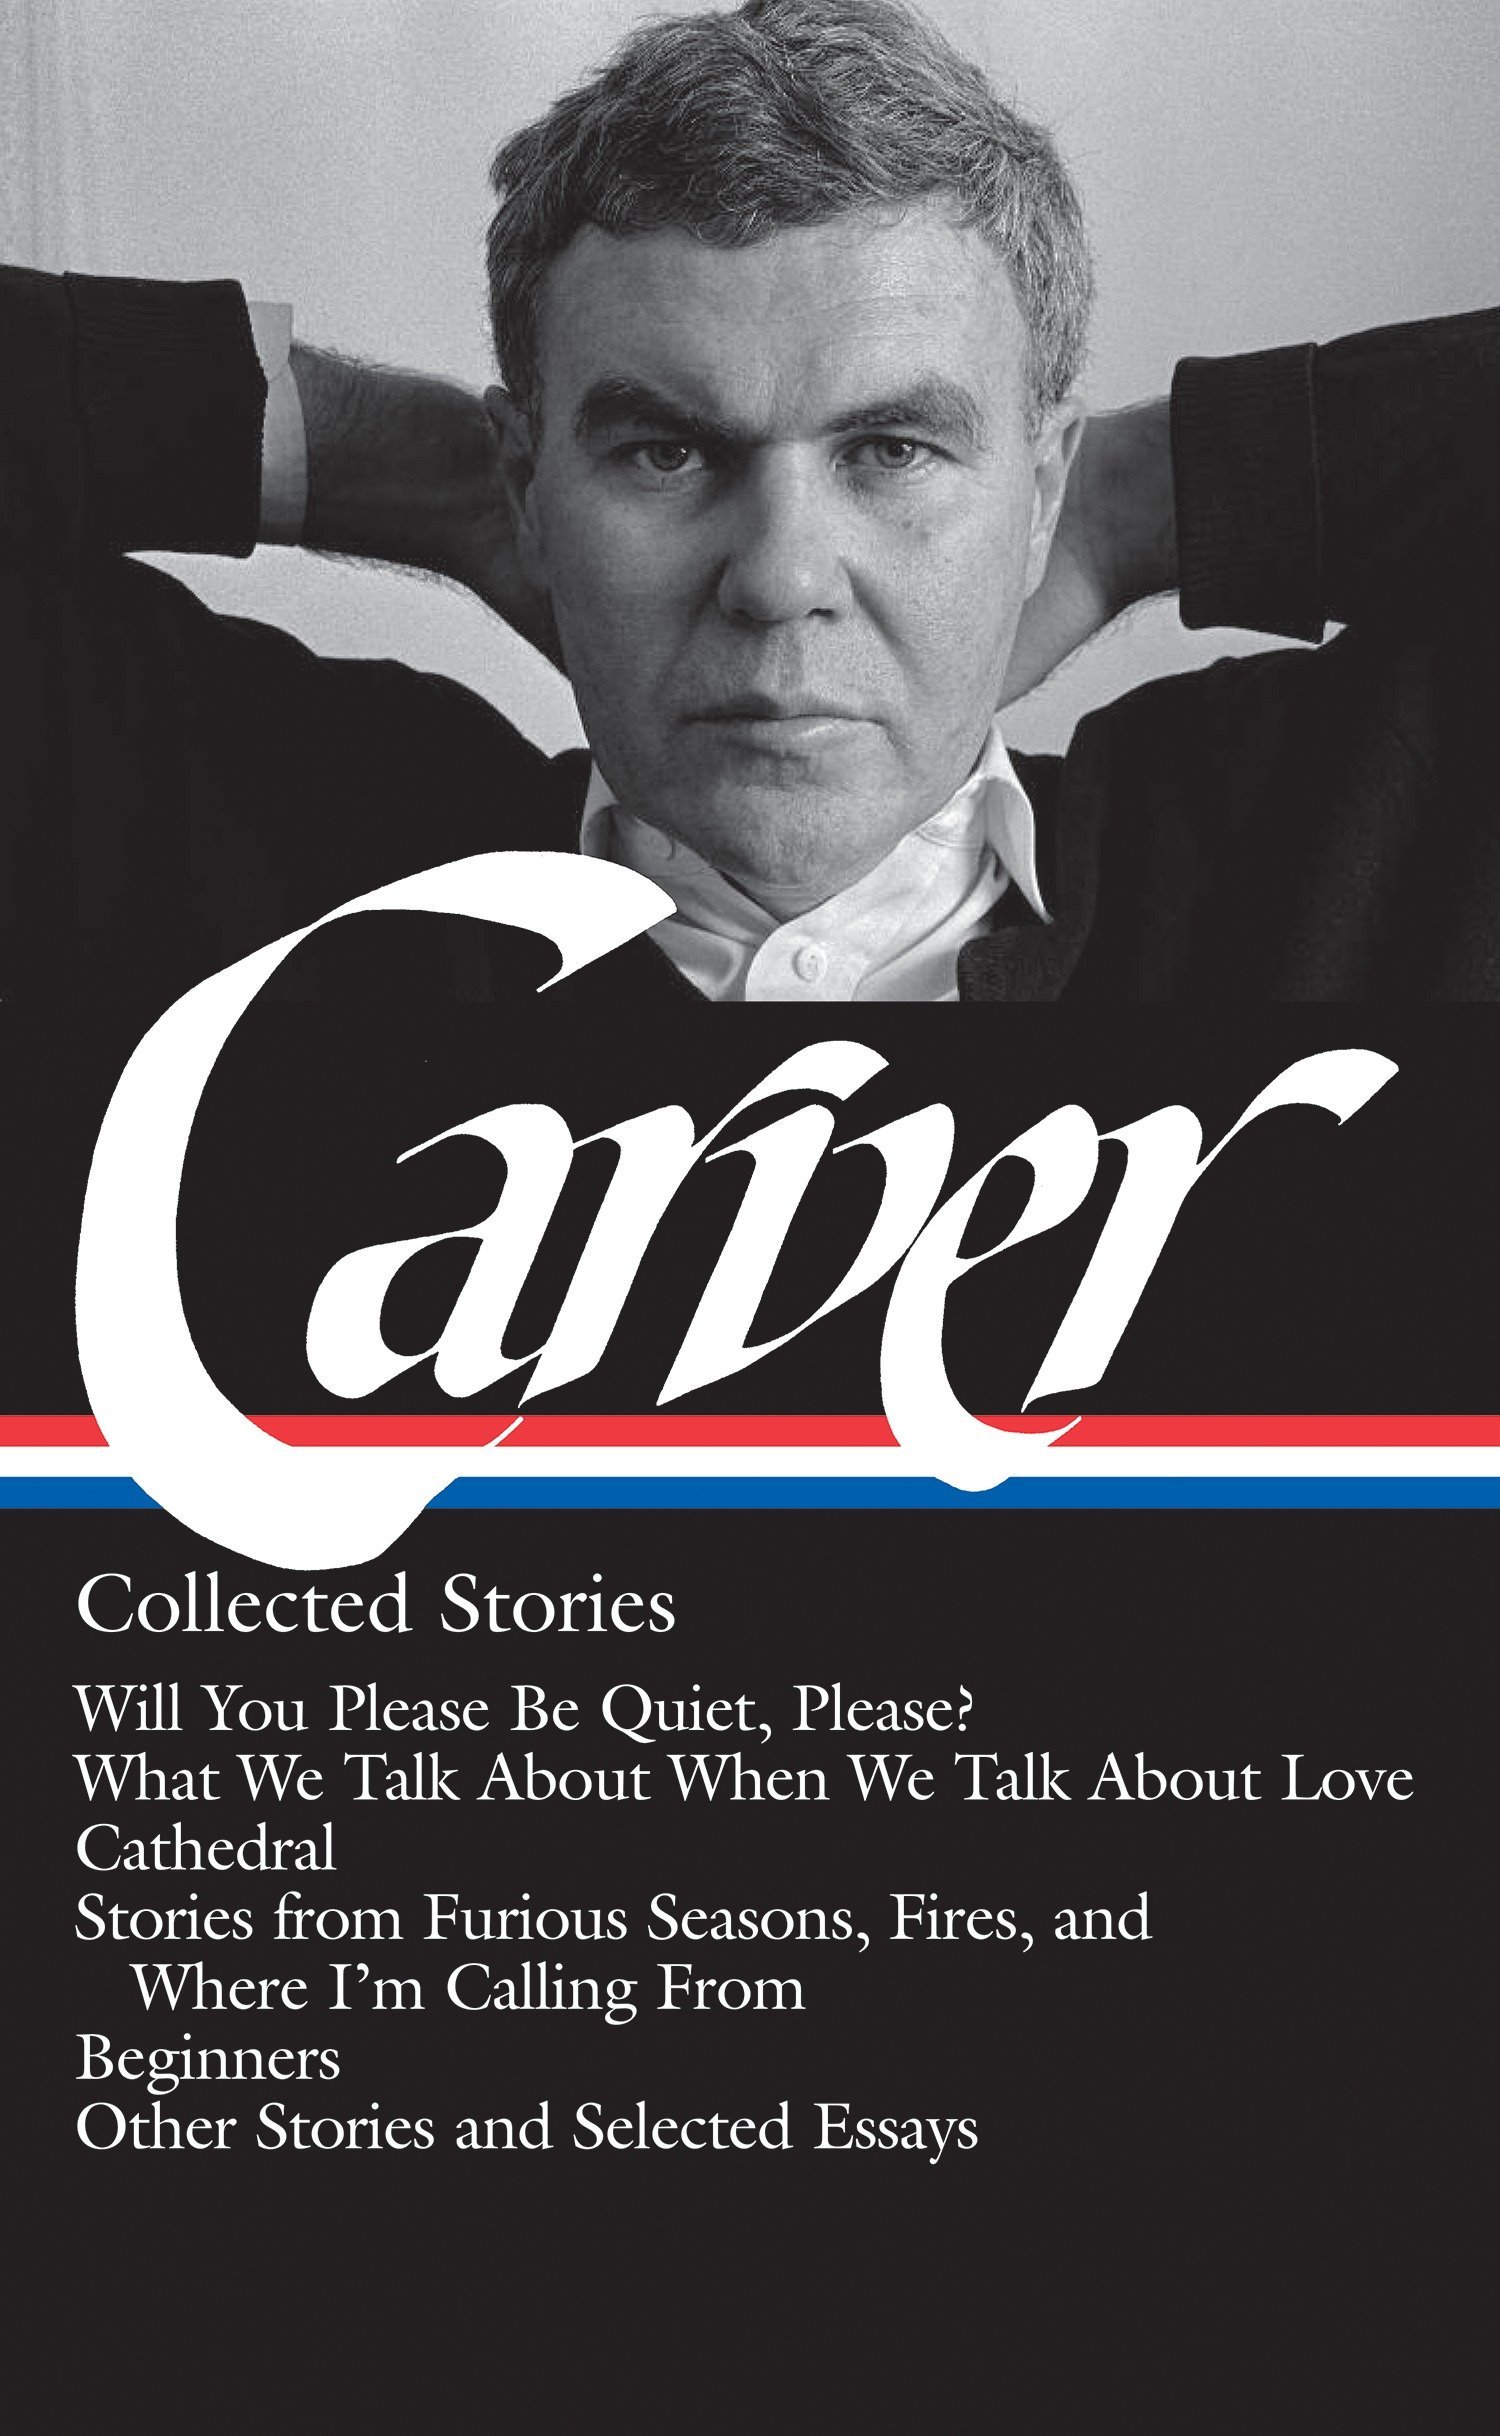 Book Cover Raymond Carver: Collected Stories (LOA #195): Will You Please Be Quiet, Please? / What We Talk About When We Talk About Love / Cathedral / stories ... / other stories (Library of America)